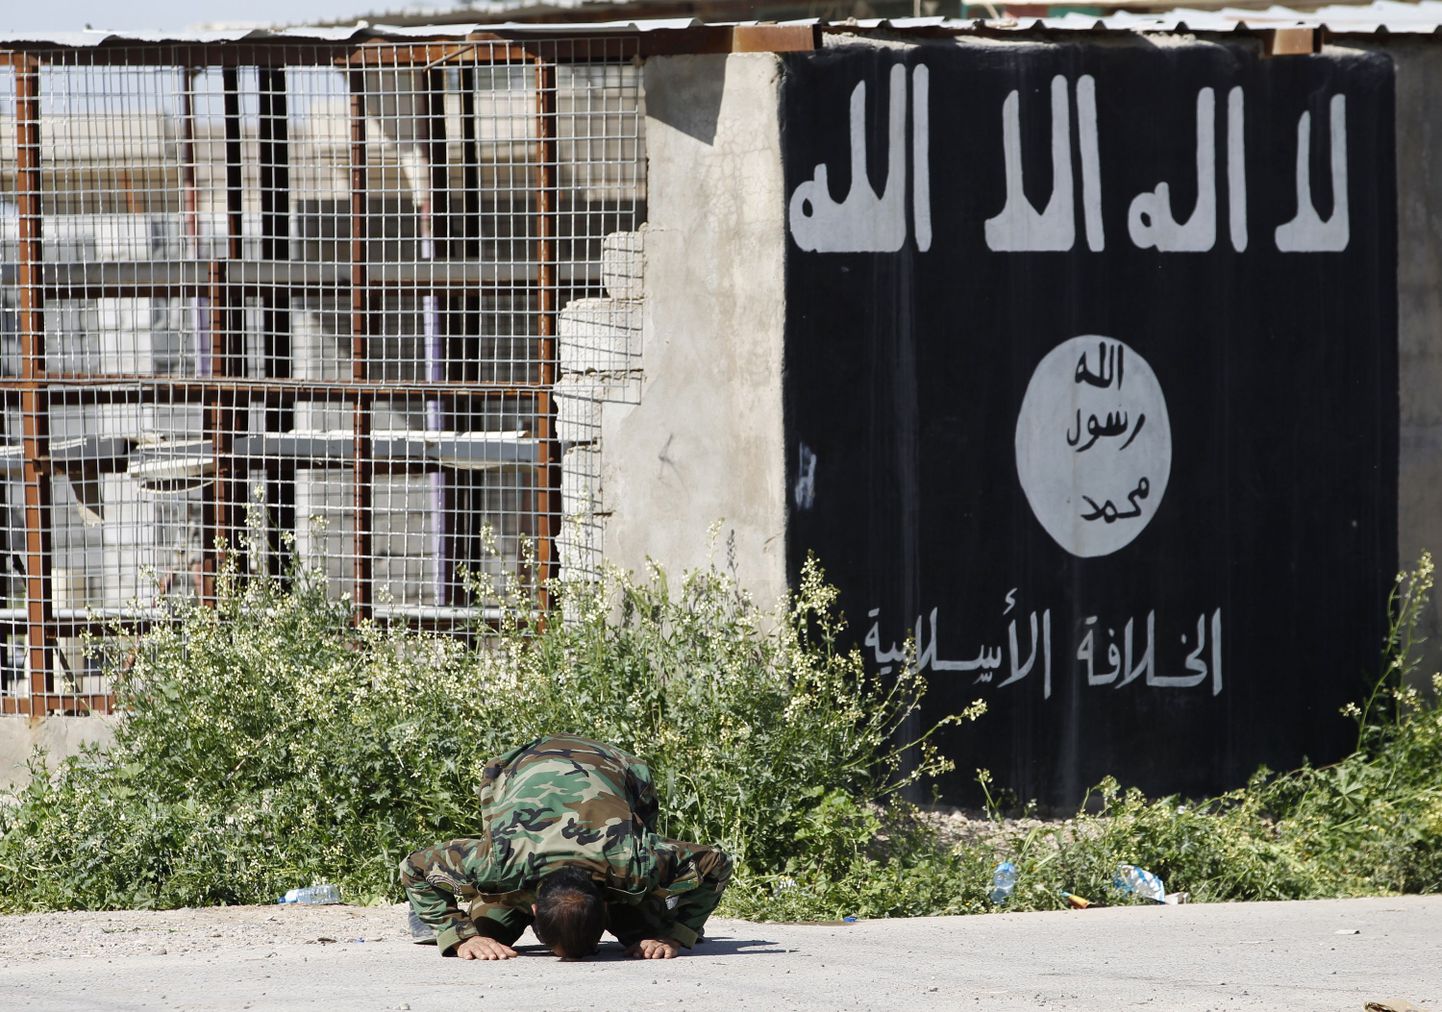 A member of militias known as Hashid Shaabi kneels as he celebrates victory next to a wall painted with the black flag commonly used by Islamic State militants, in the town of al-Alam March 10, 2015. Iraqi troops and militias drove Islamic State insurgents out of the town of al-Alam on Tuesday, clearing a final hurdle before a planned assault on Saddam Hussein's home city of Tikrit in their biggest offensive yet against the ultra-radical group. REUTERS/Thaier Al-Sudani (IRAQ - Tags: POLITICS CIVIL UNREST CONFLICT)